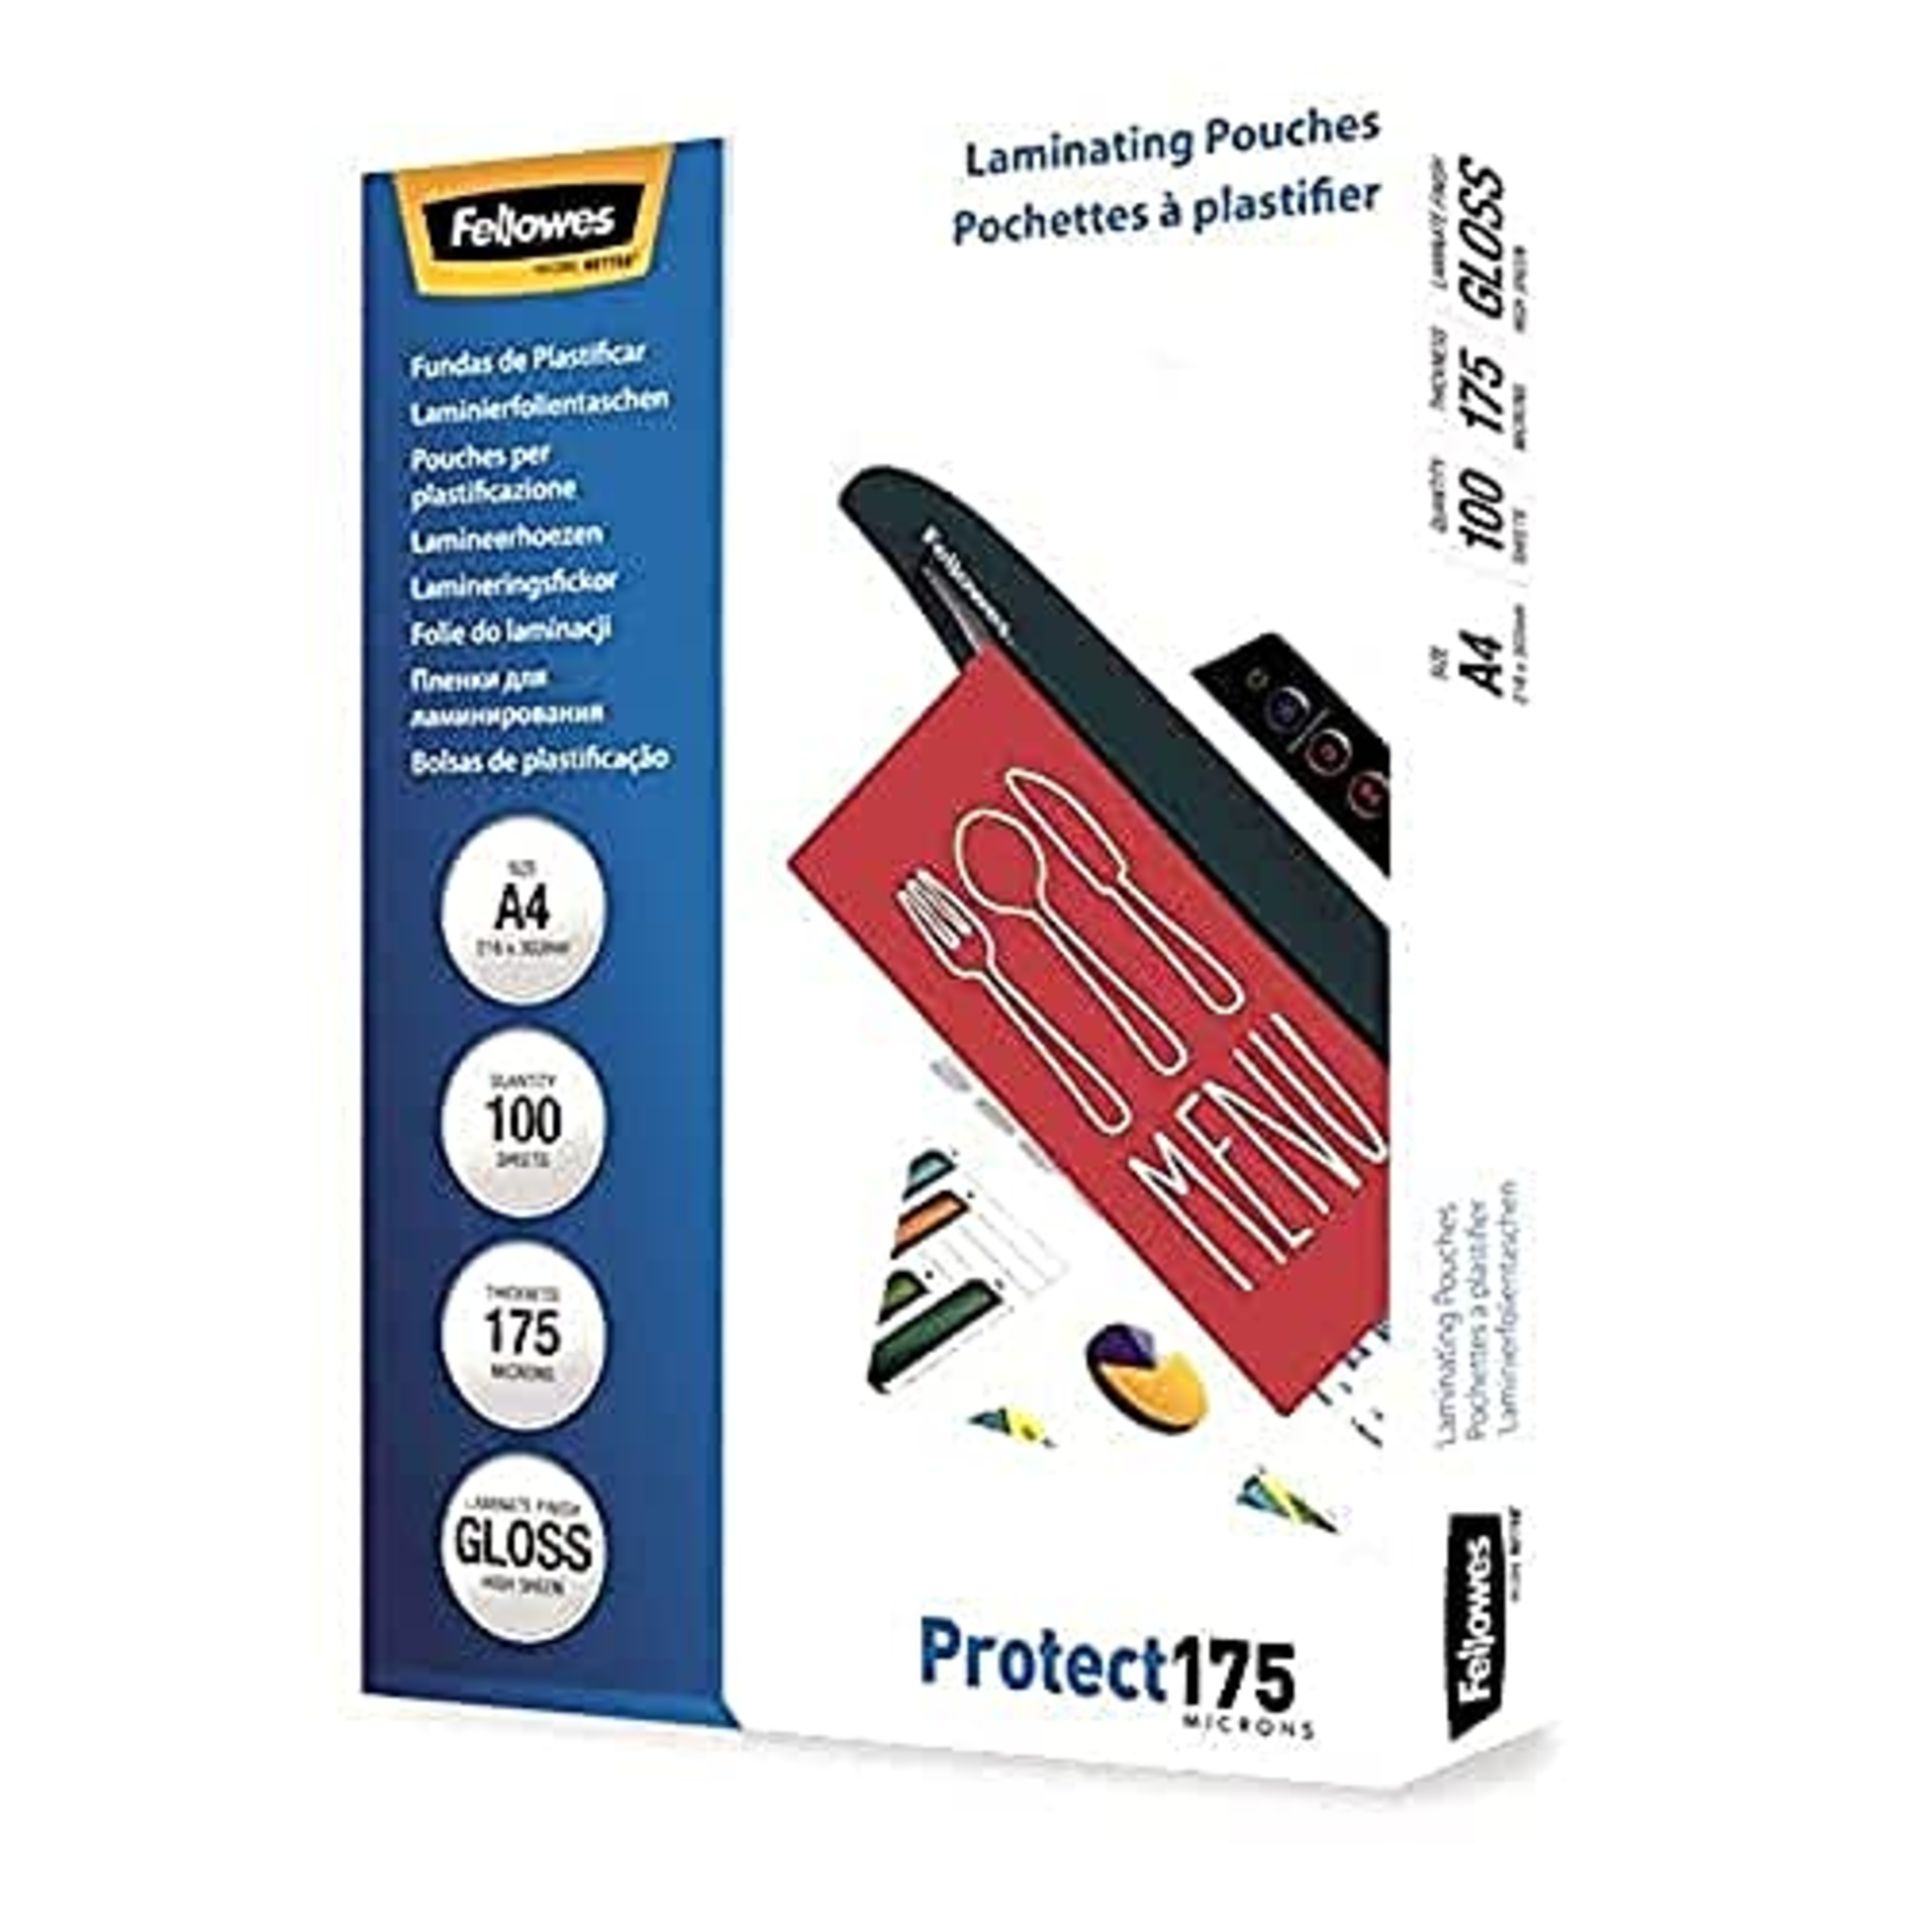 Fellowes 5308703 Protect 175 microns A4 glossy lamination pouches - Pack of 100 Transp